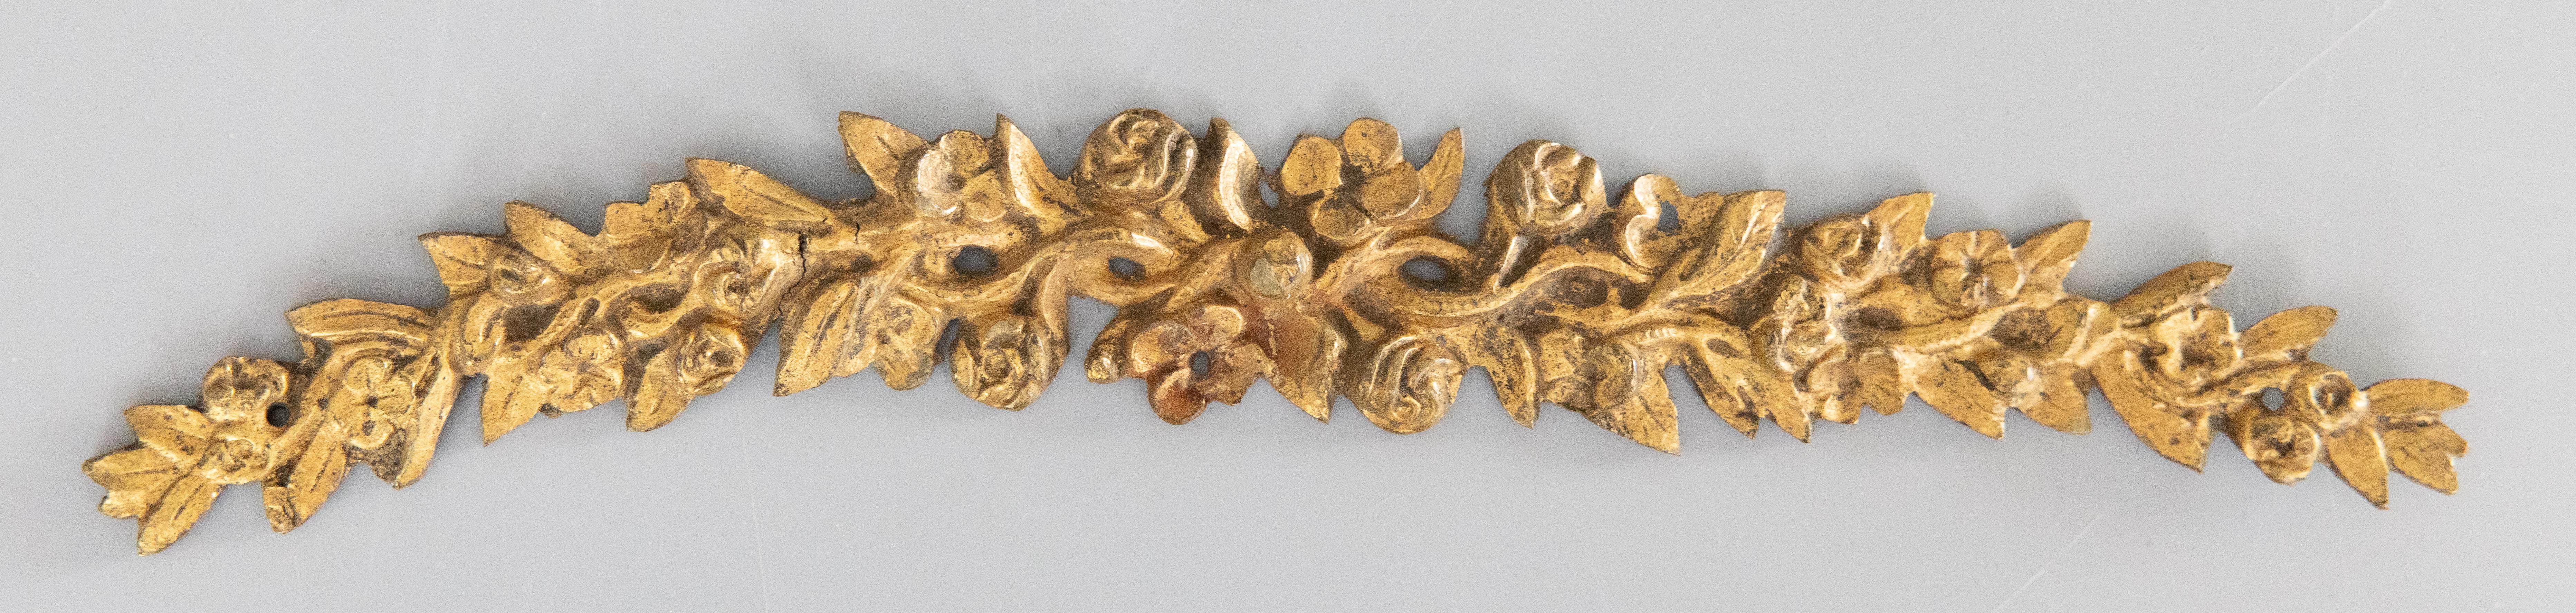 19th Century French Gilt Bronze Floral Garland Cornice Wall Swag Ornament For Sale 1